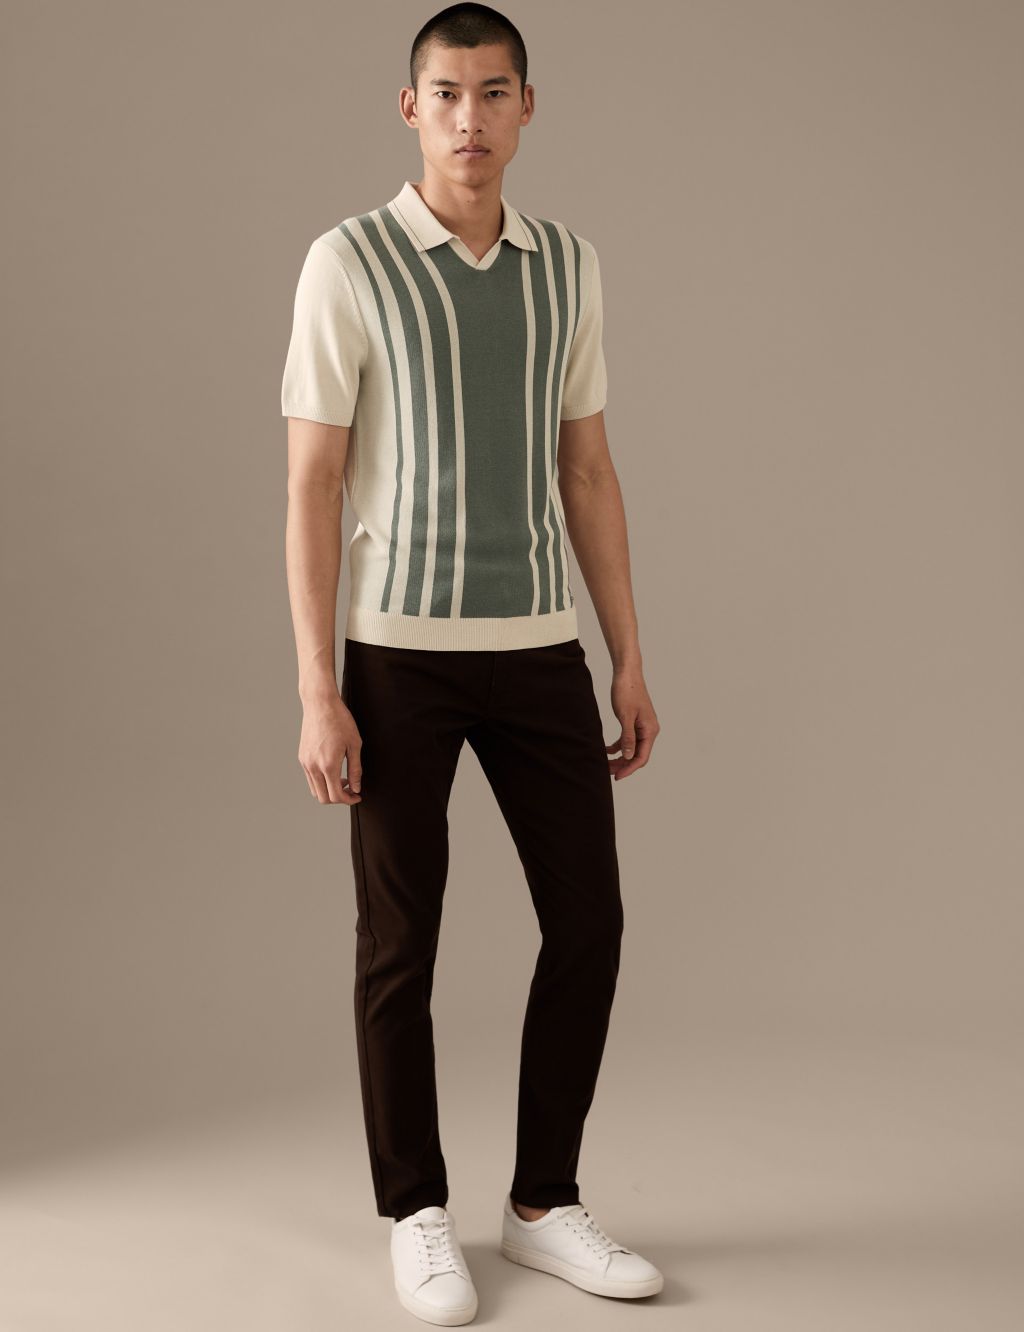 Cotton Blend Striped Knitted Polo Shirt image 4